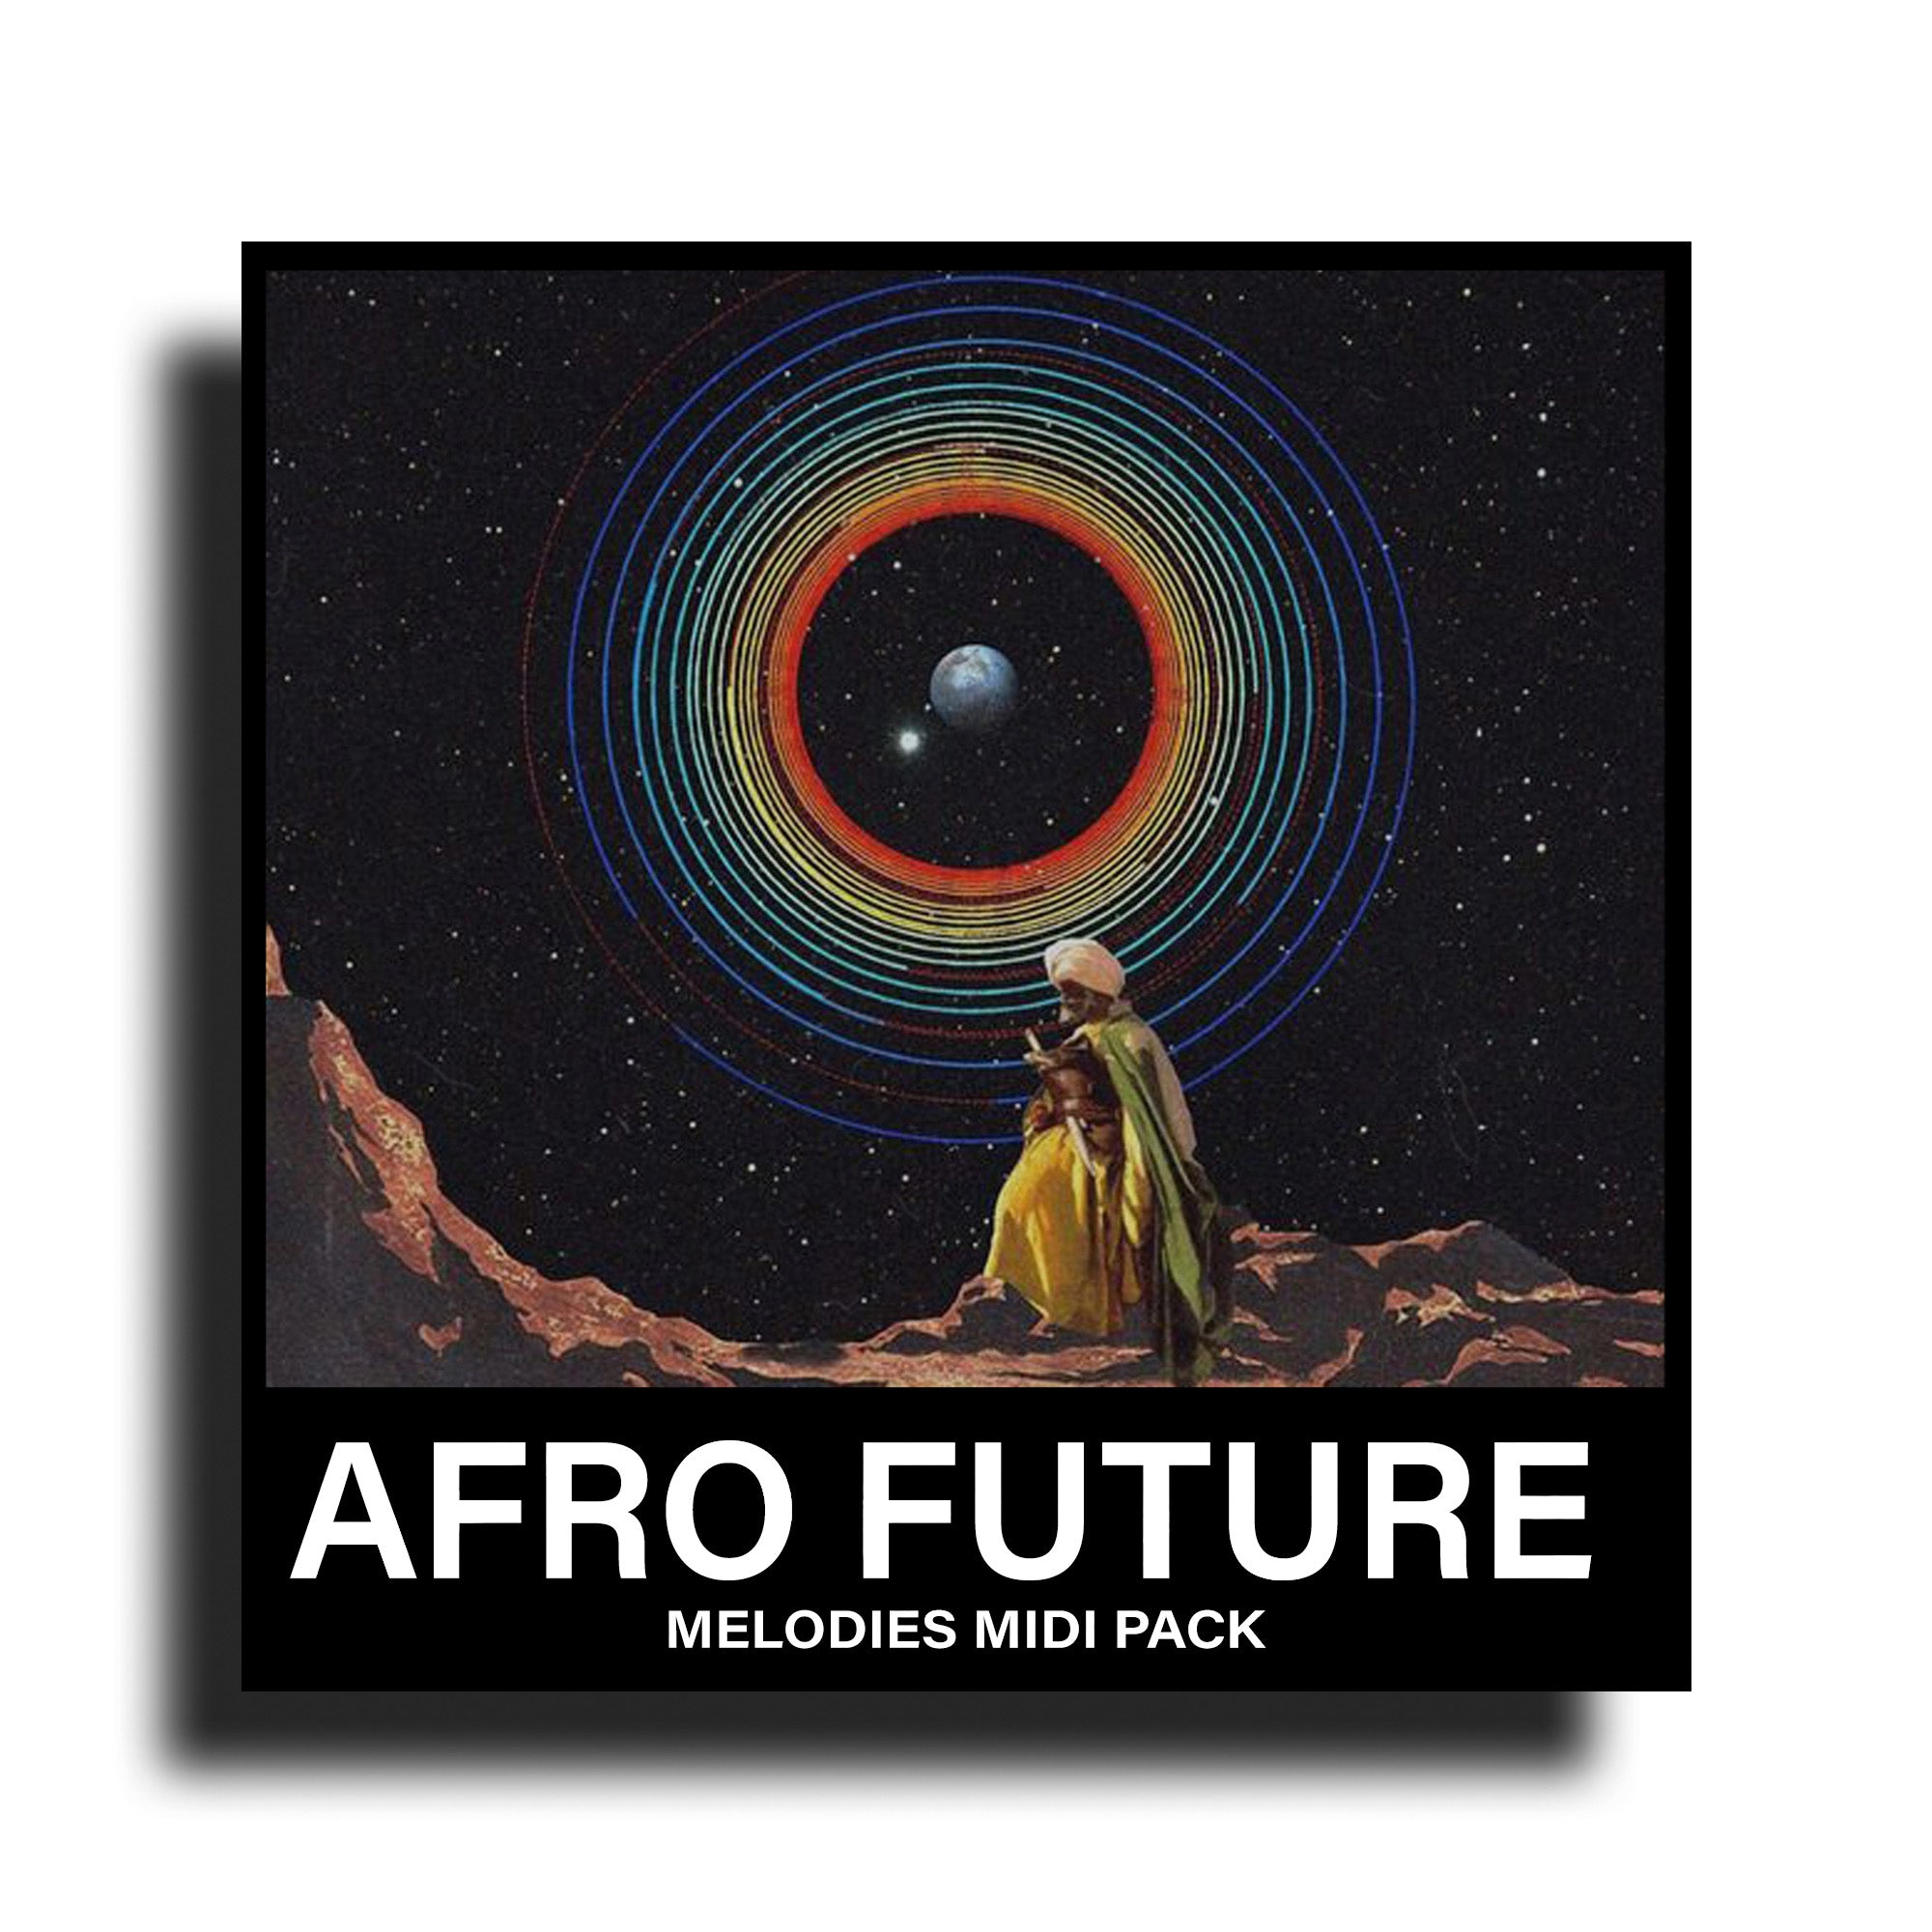 Afro Future Melodies Midi Pack